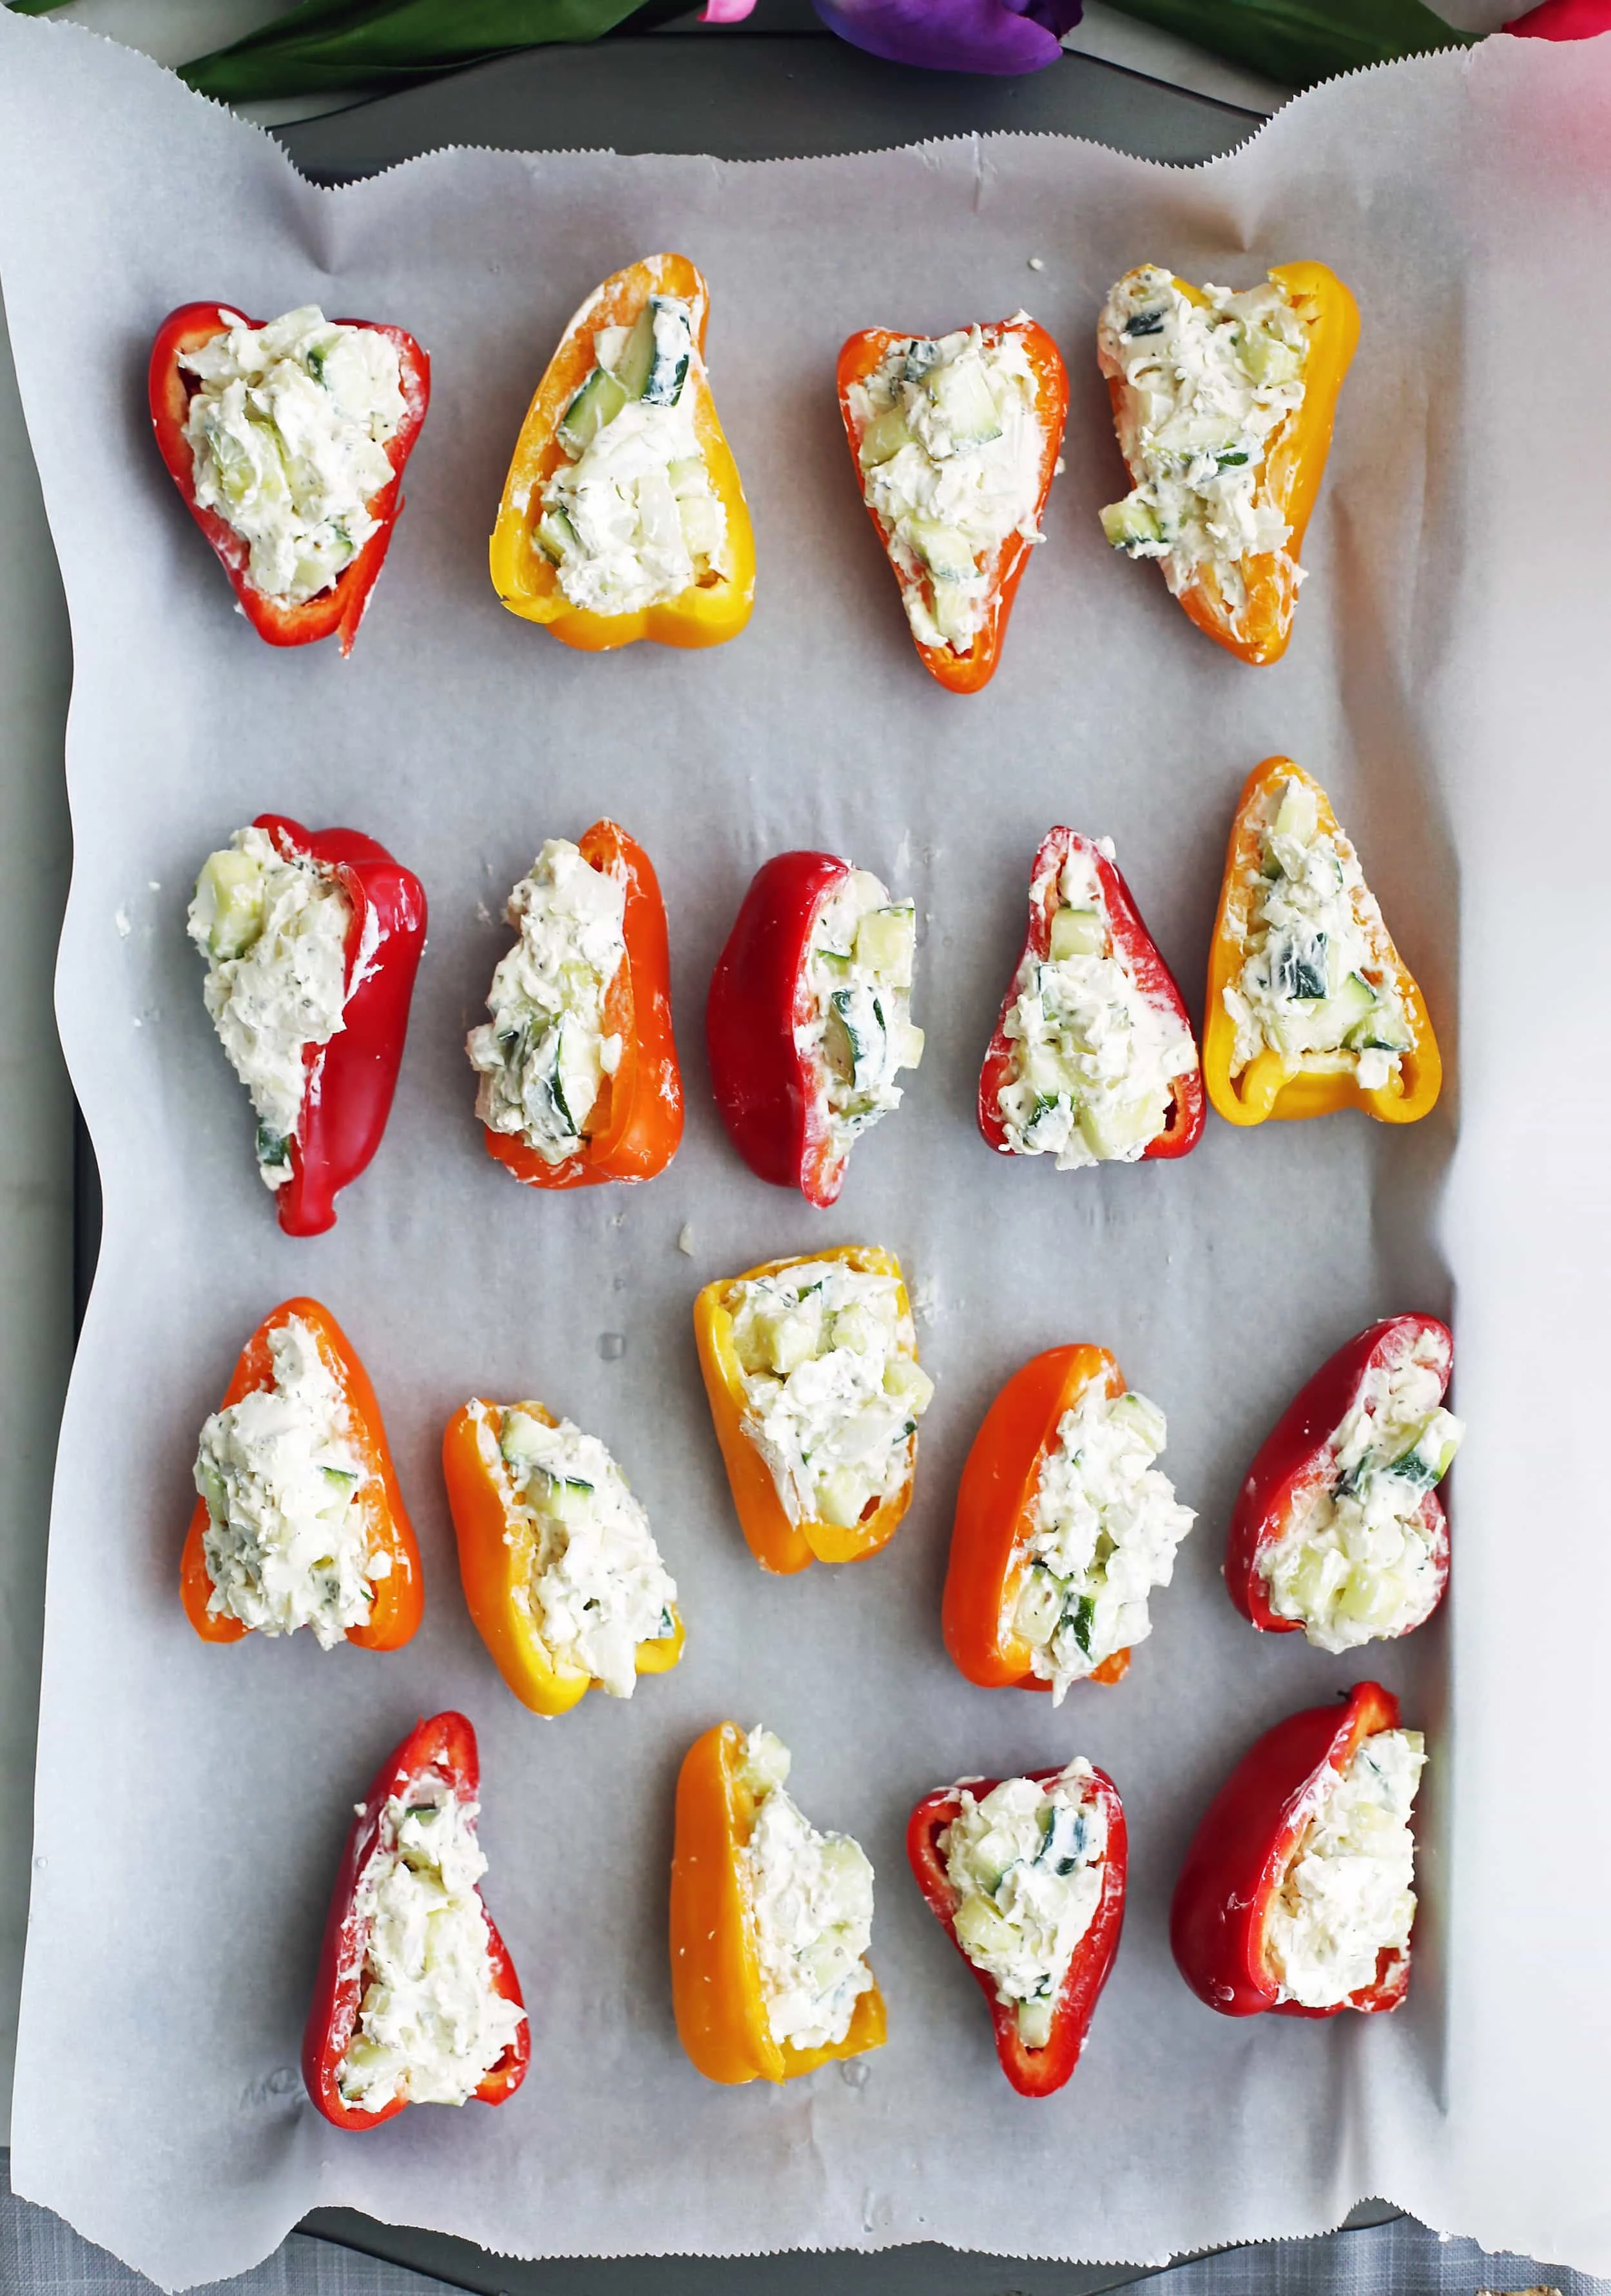 Zucchini and cream cheese mini stuffed peppers ready to be baked on a large baking sheet.